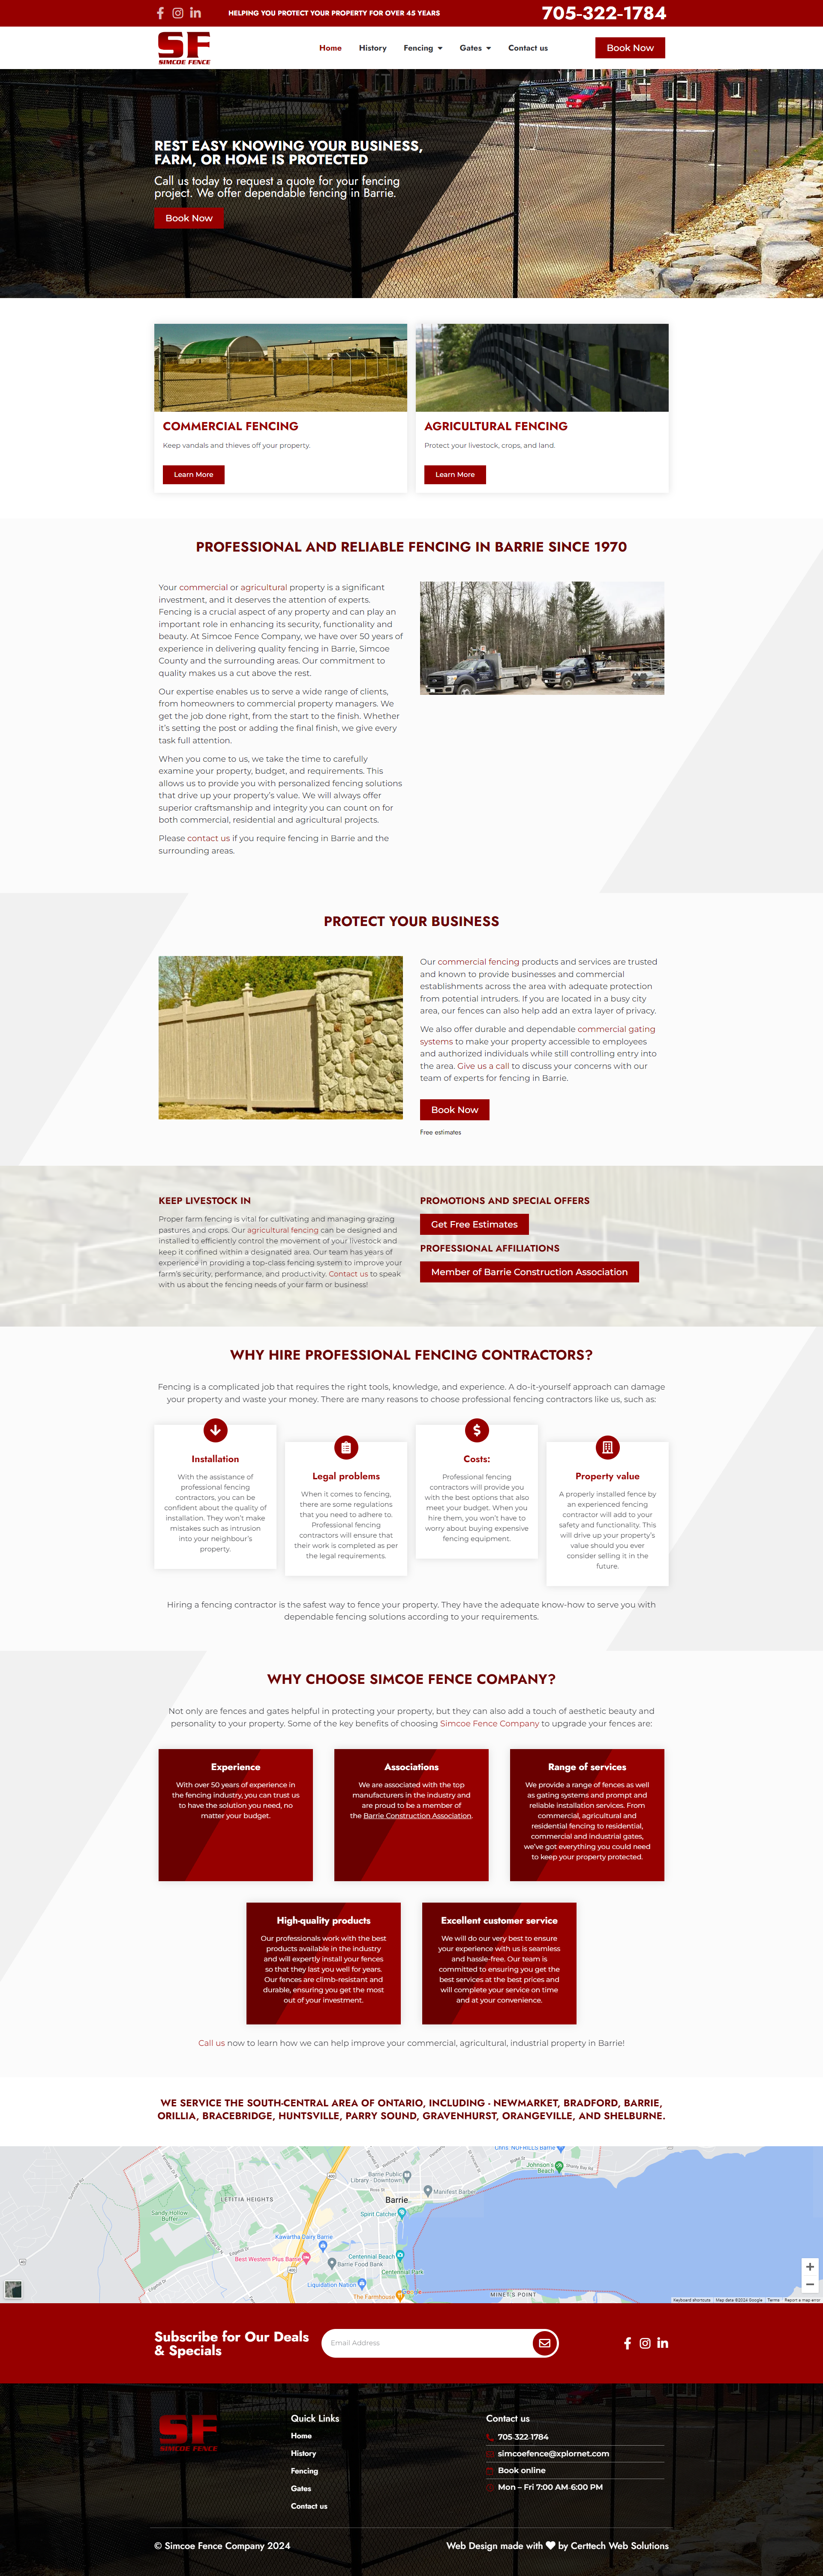 Screenshot of Simcoe Fence's webpage featuring sections on commercial and residential fencing services, company history, benefits of hiring professional contractors, and contact information.